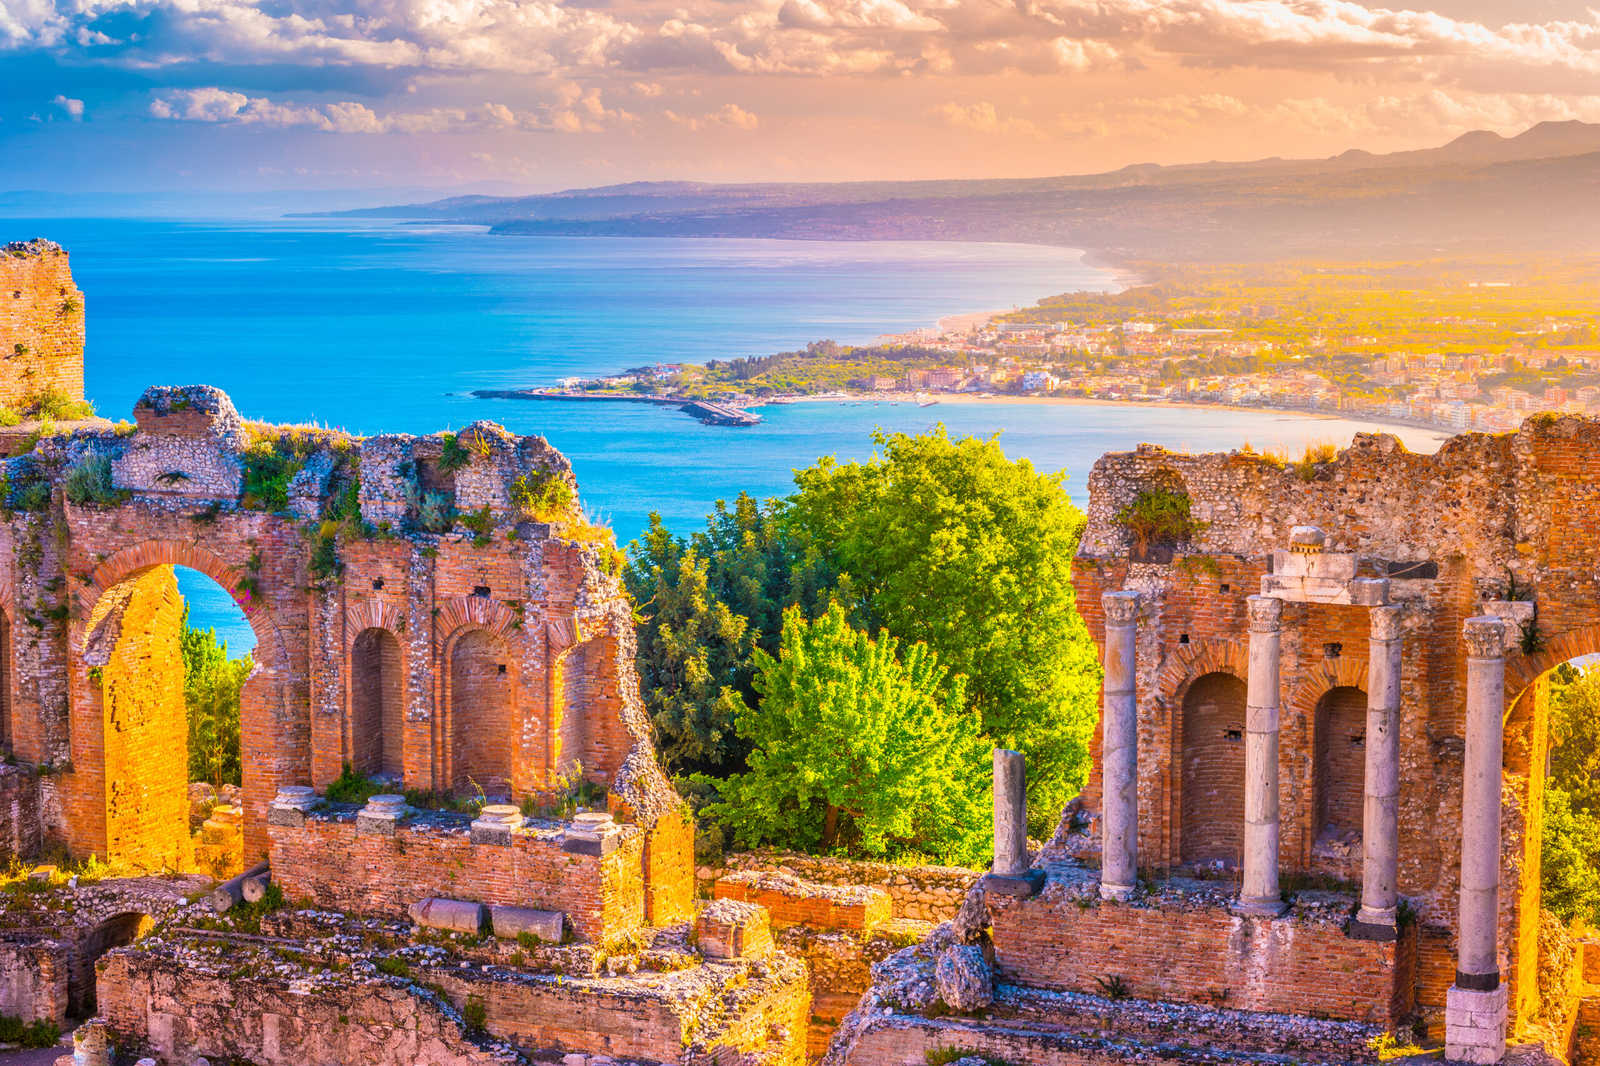 Where to Stay in Taormina